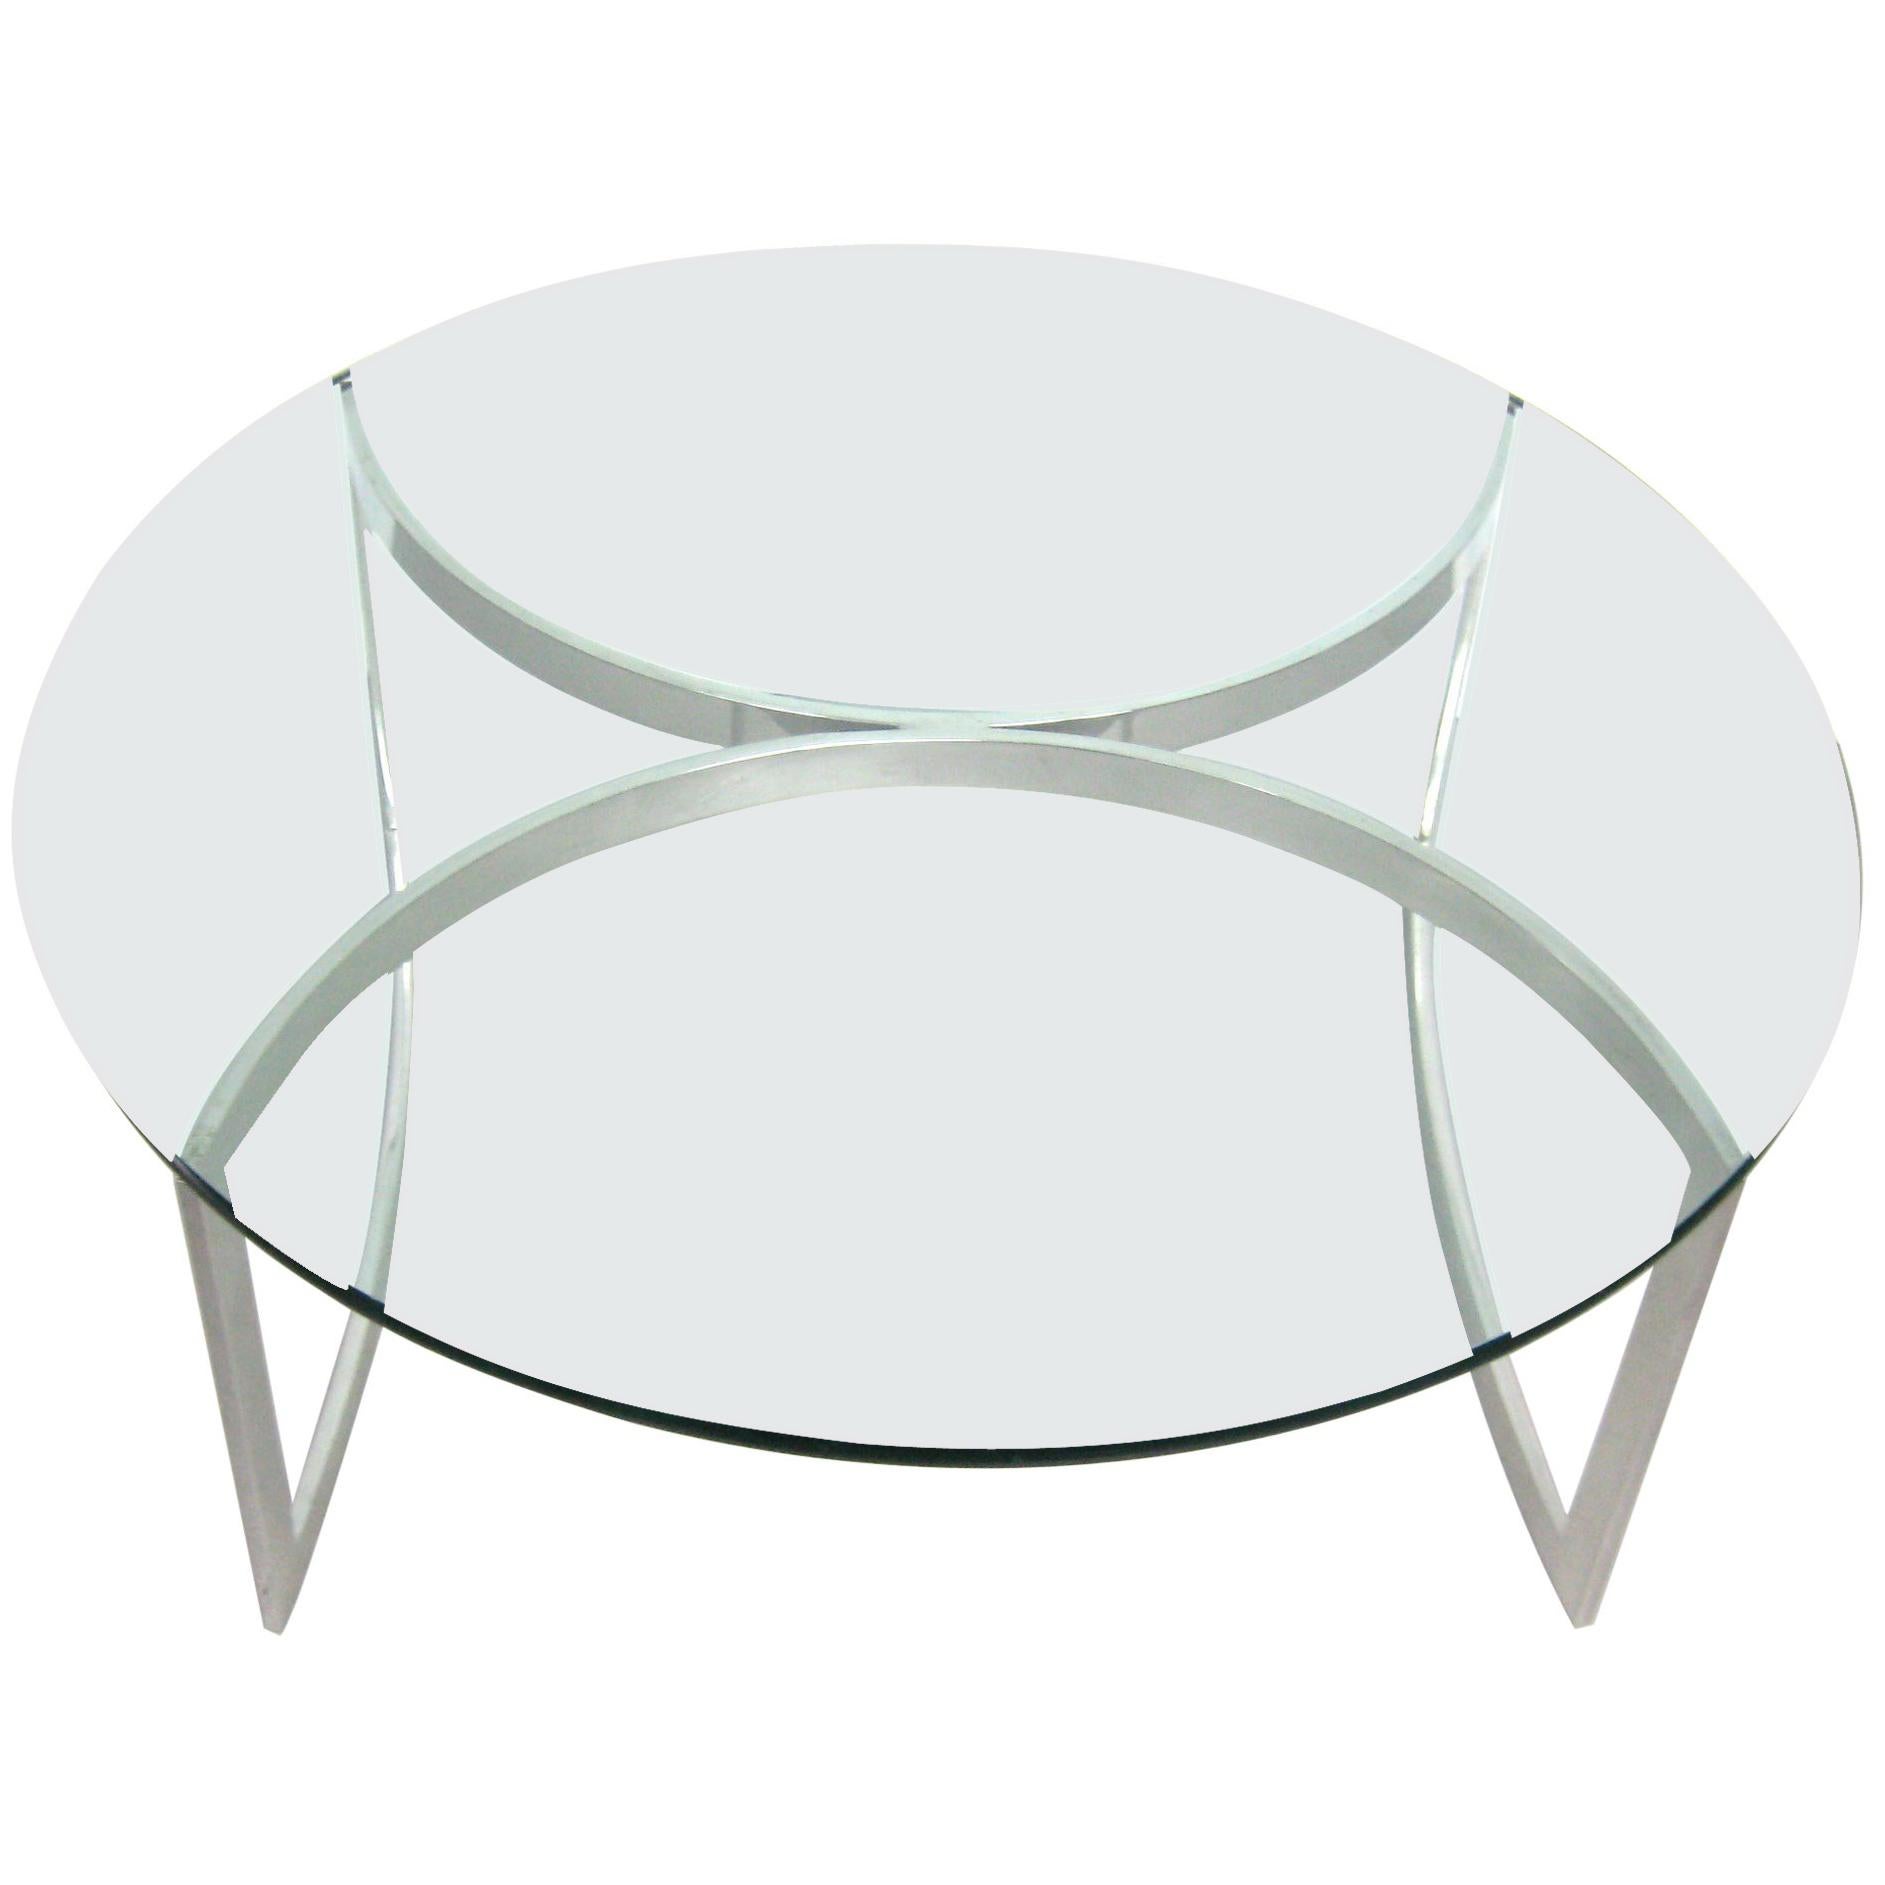 Late Mid-Century Modern 1970s Stainless Steel Round Glass Top Coffee Table